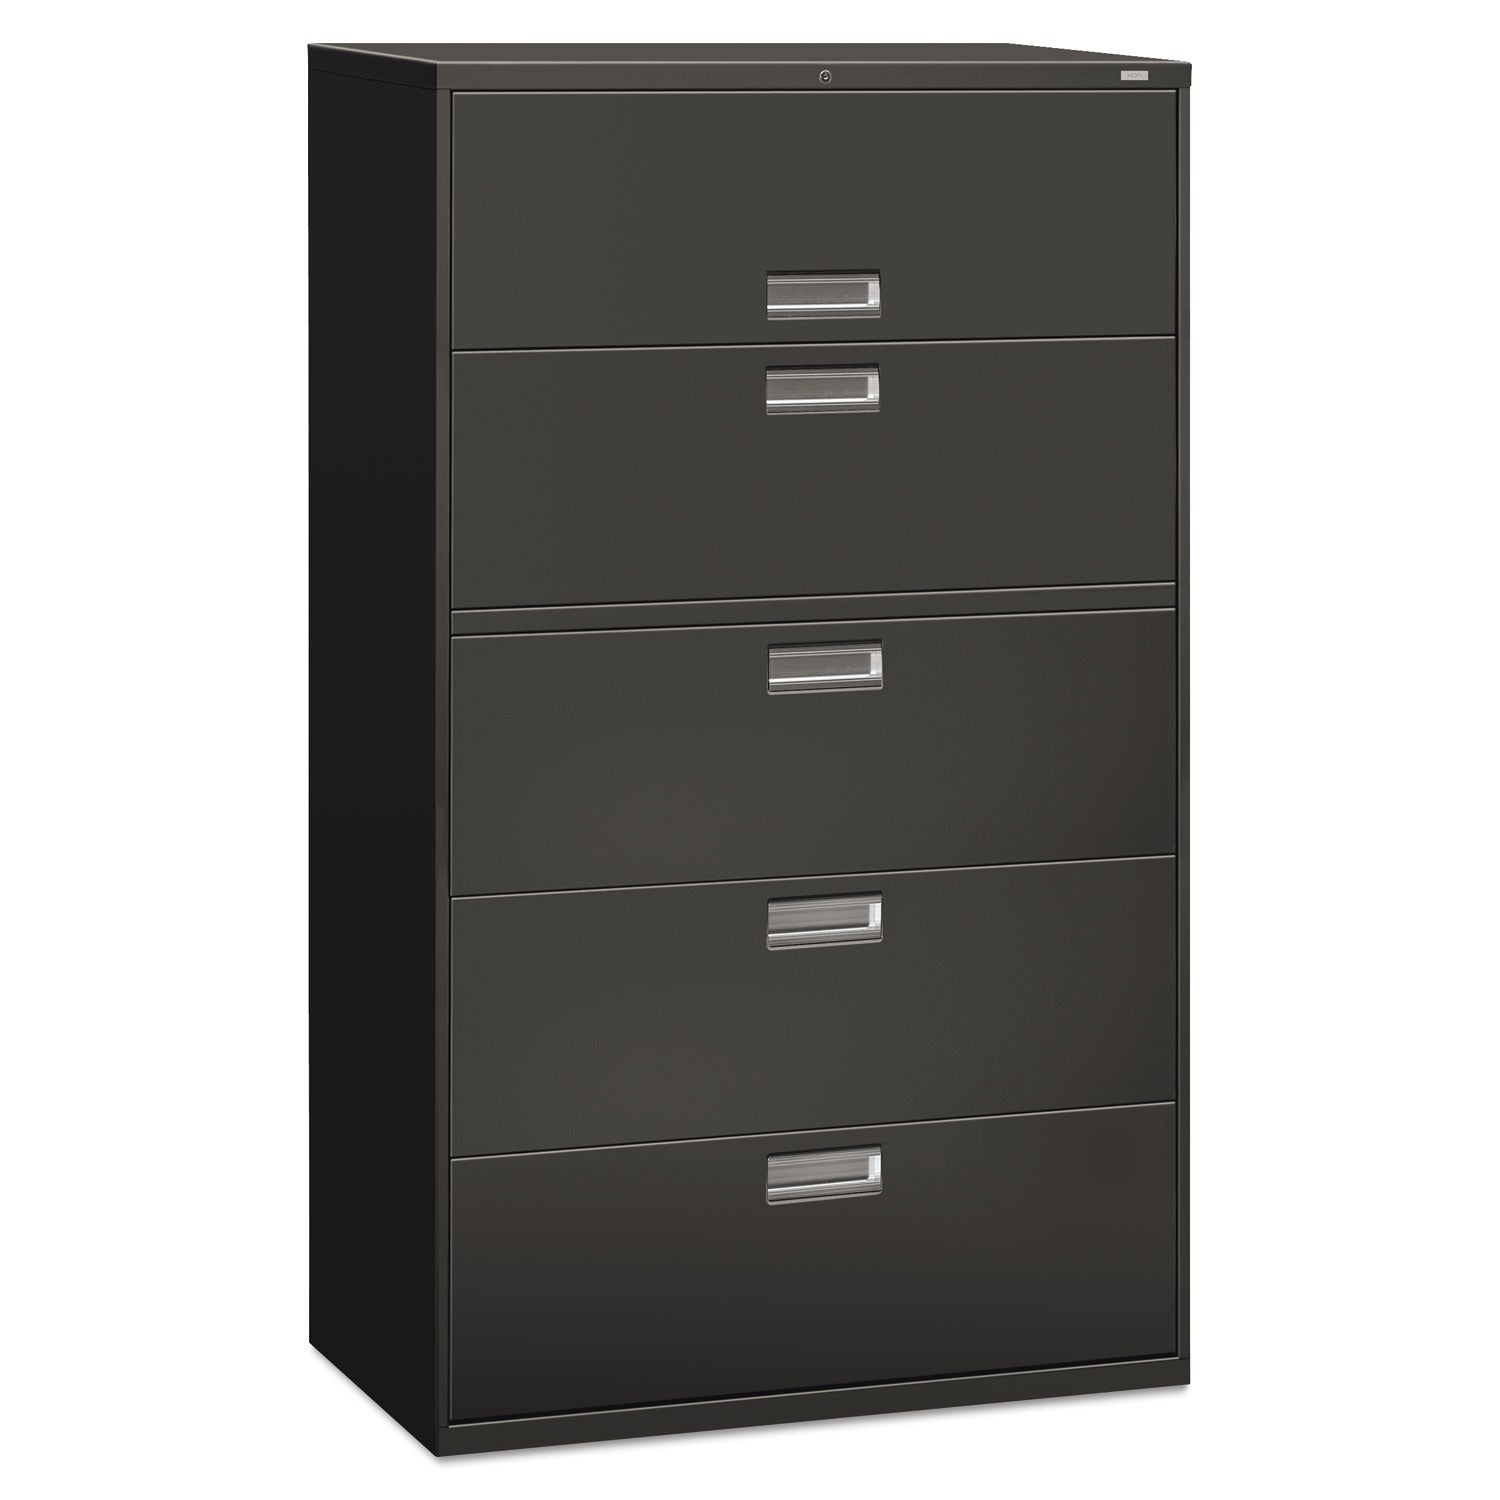 Brigade 600 Series Lateral File, 4 Legal/Letter-Size File Drawers, 1 Roll-Out File Shelf, Charcoal, 42" x 18" x 64.25 - 